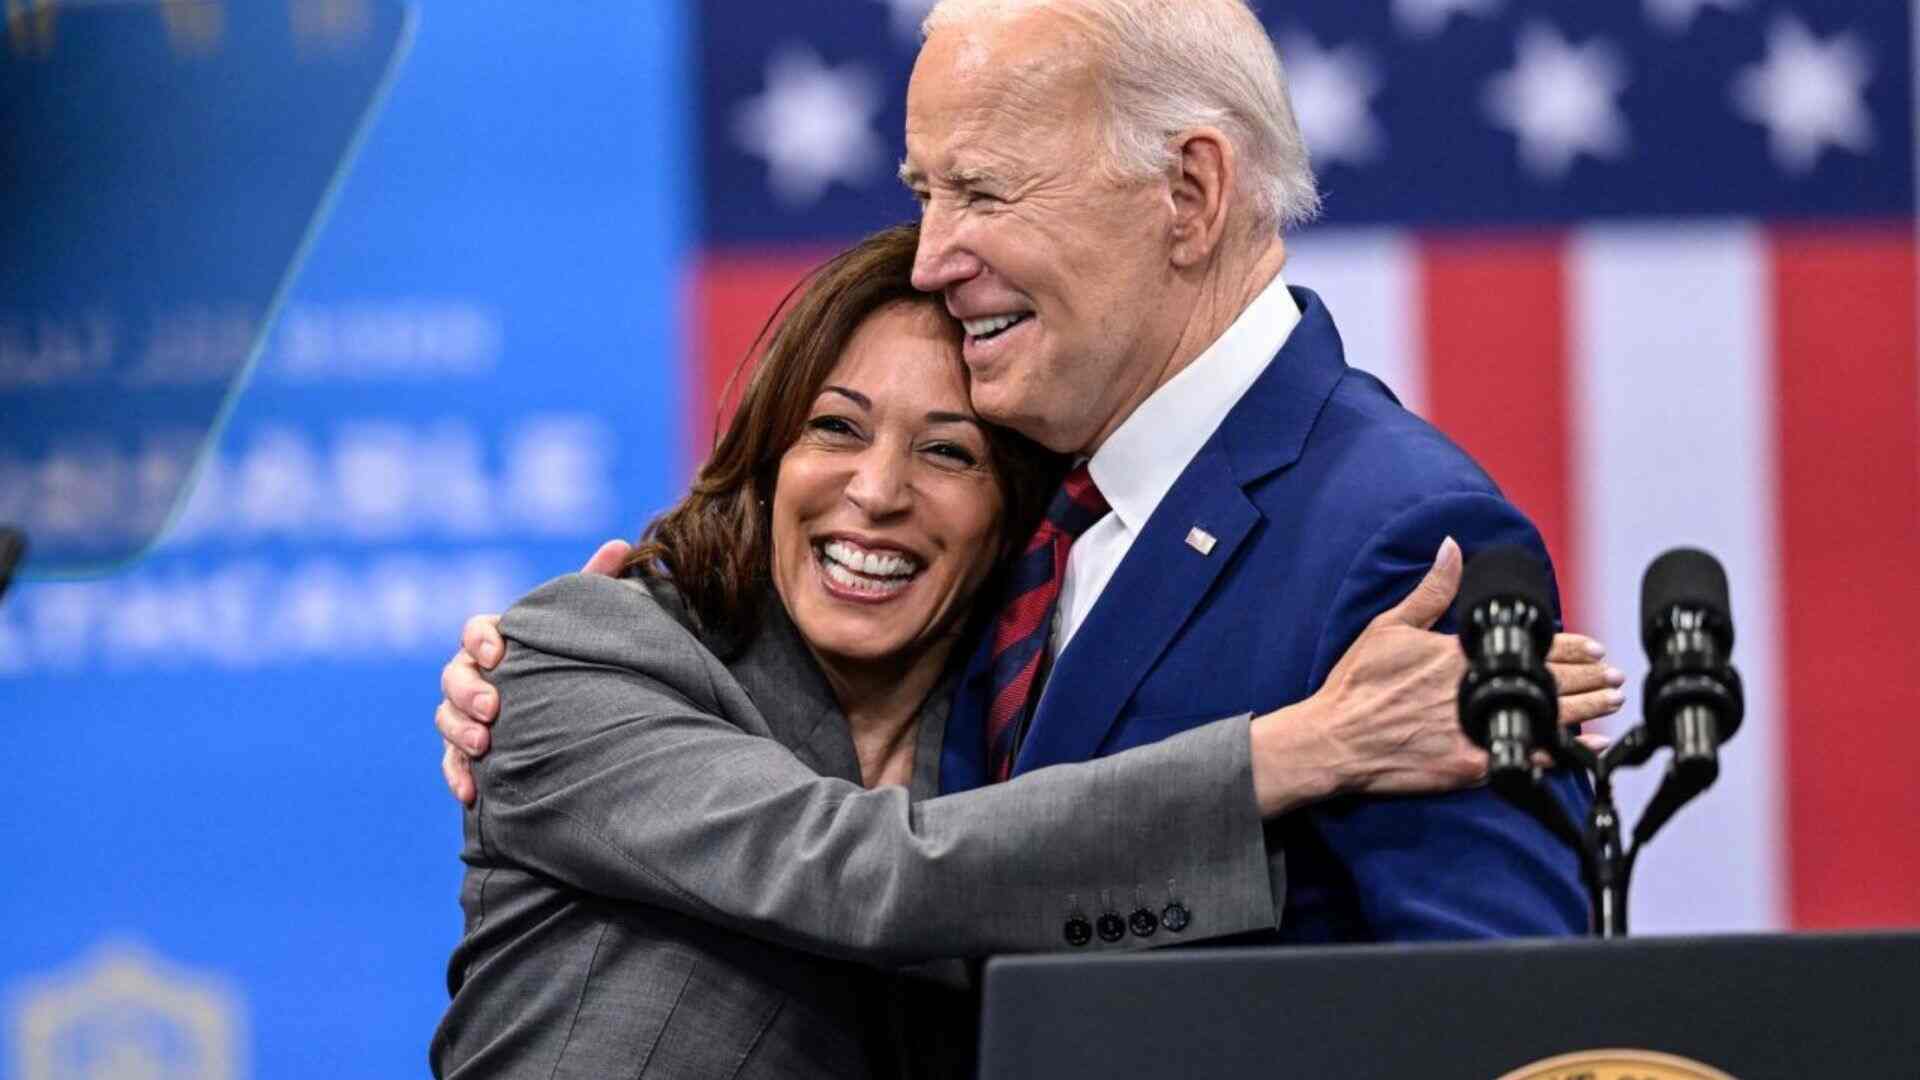 Biden Exits 2024 Race, Backs Harris; Michelle Obama Emerges as Potential Trump Opponent